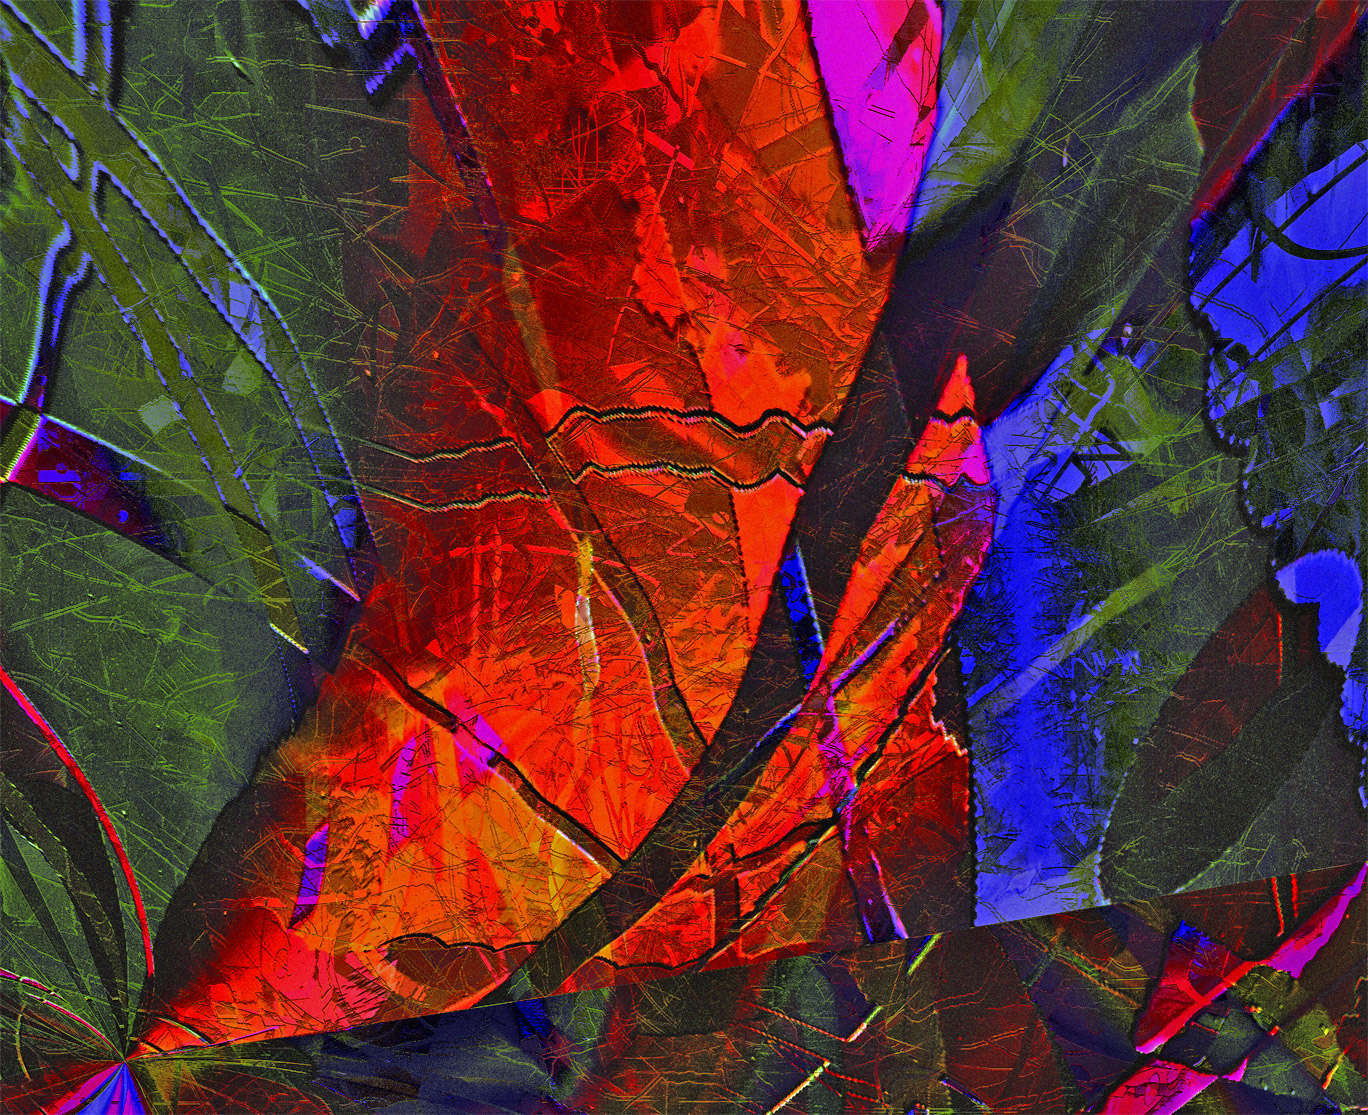 887-1b-72-DPI.jpg : Section 3 : American artist digital invention archival artifact color print image emerging capture creative convergent transparency universe dream history painter Hybrid exhibition